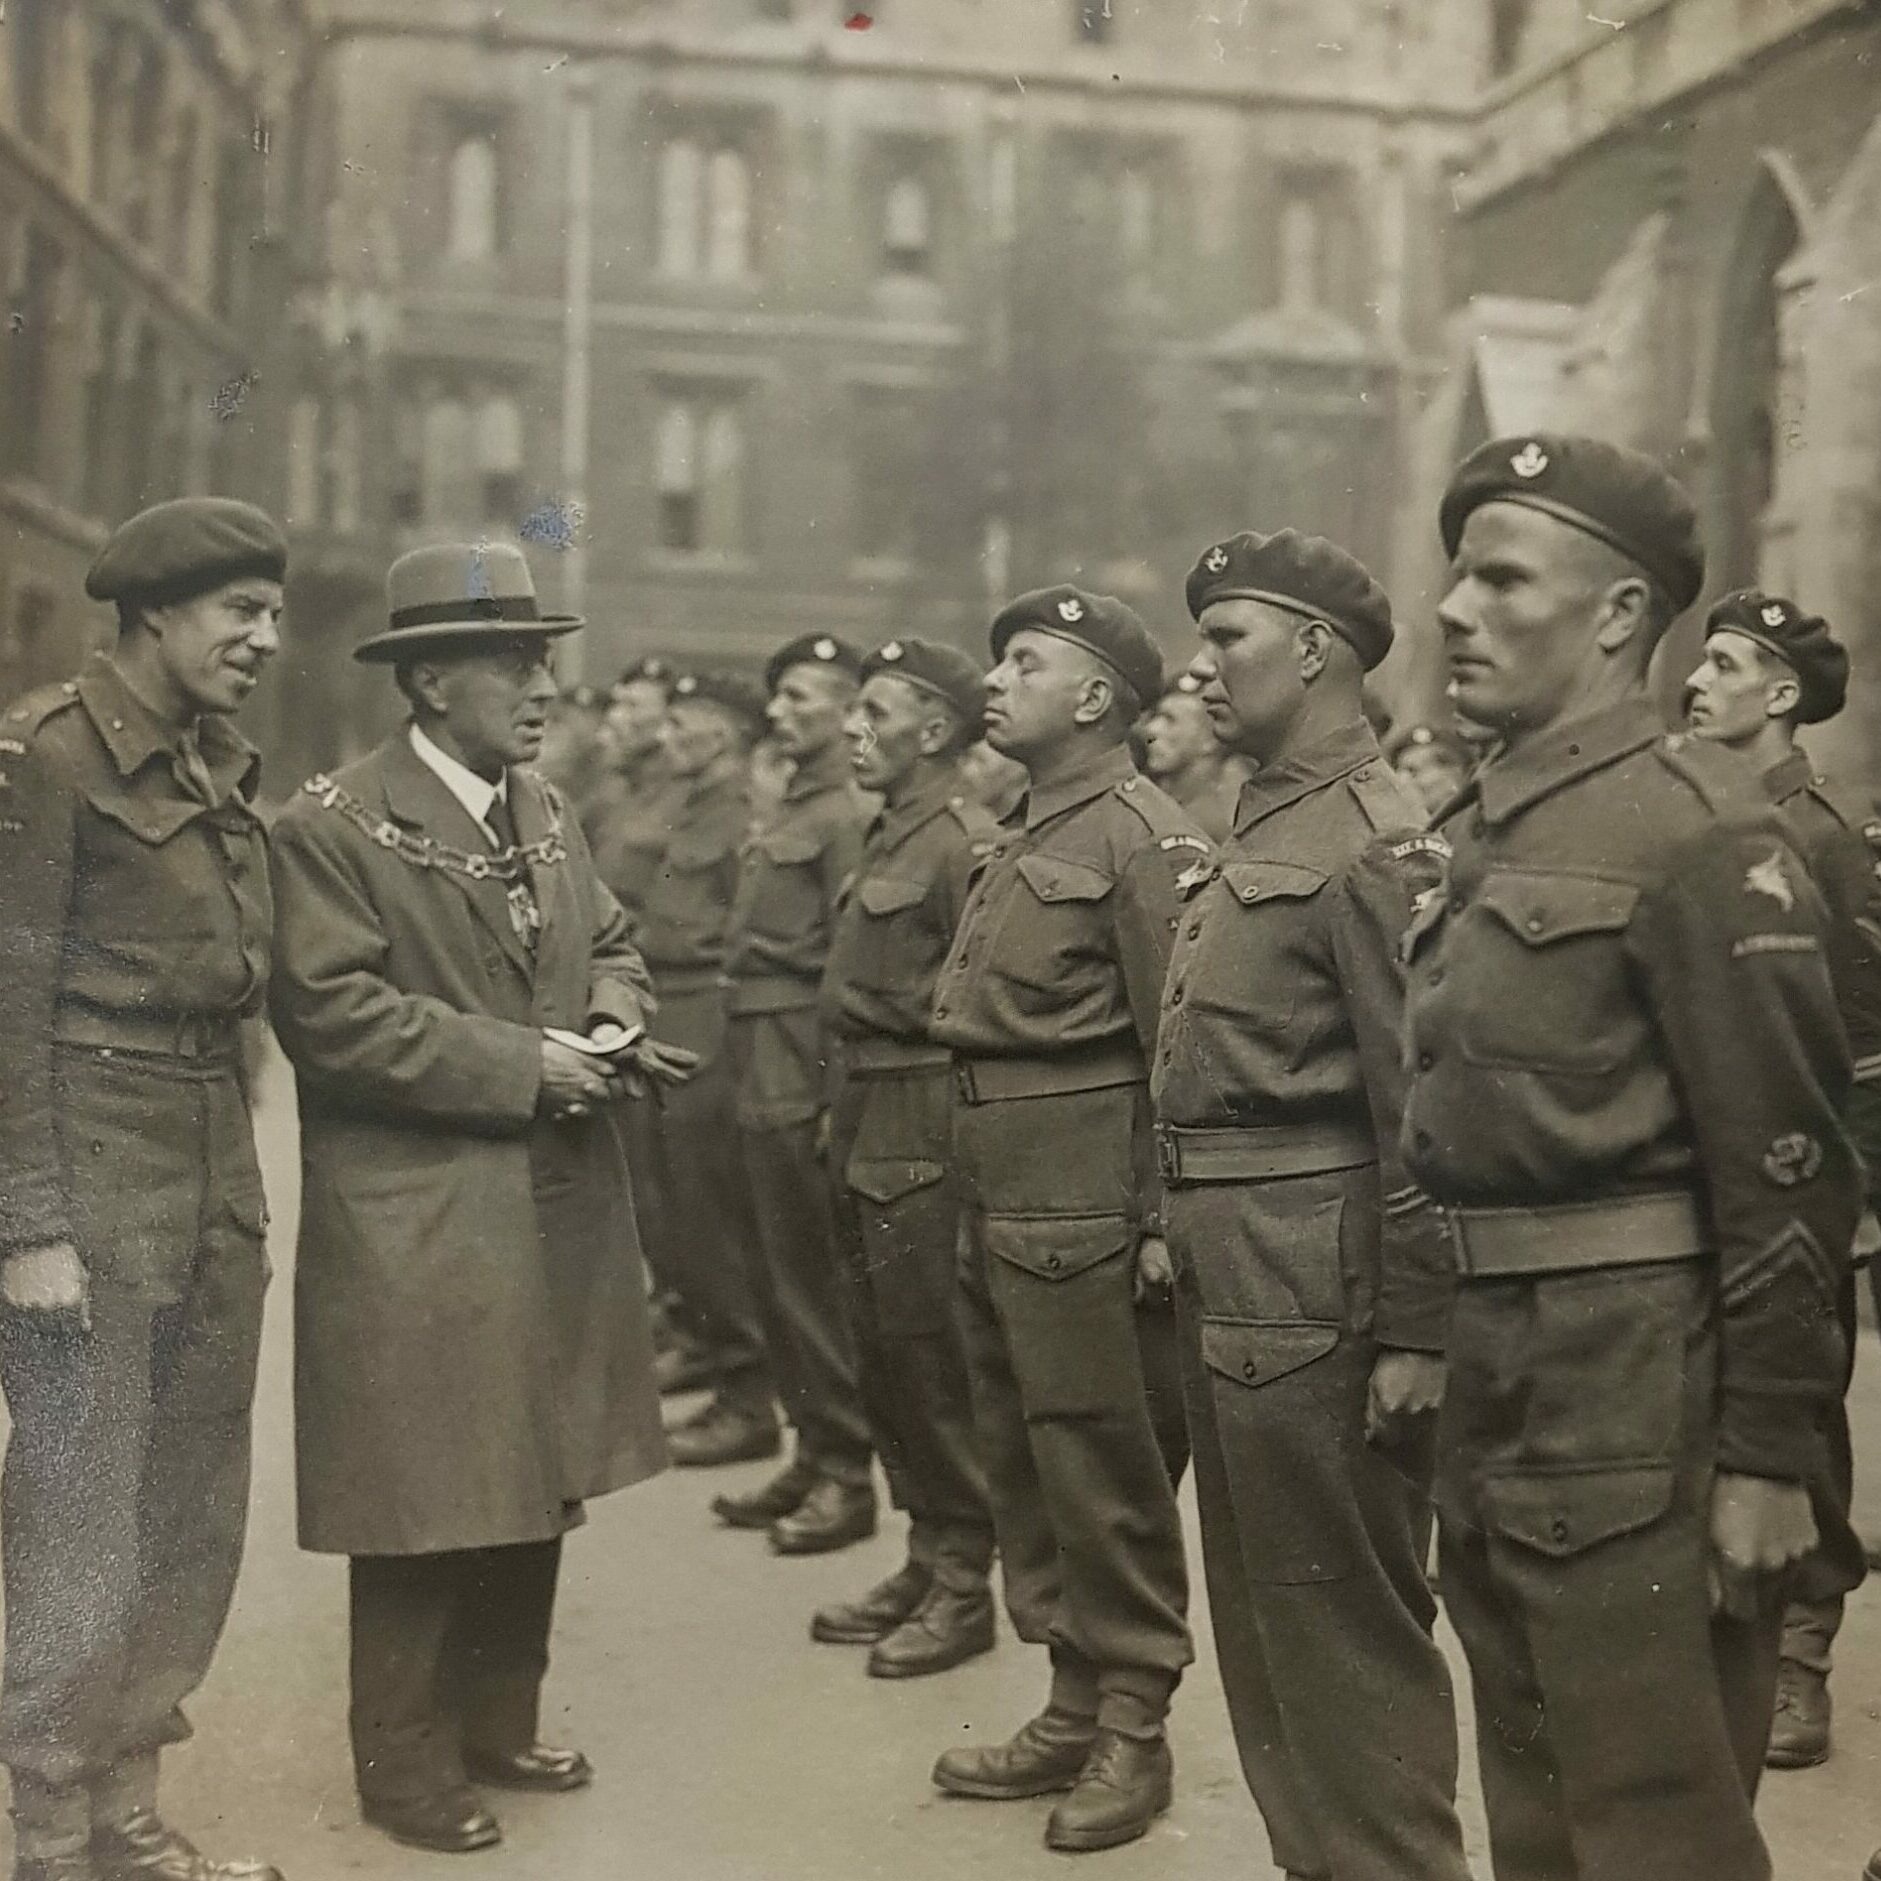 2FMajor-John-Howard-with-soldiers-of-2nd-Battalion-Oxfordshire-and-Buckinghamshire-Light-Infantry-during-Oxford-Salute-the-Soldier-celebration